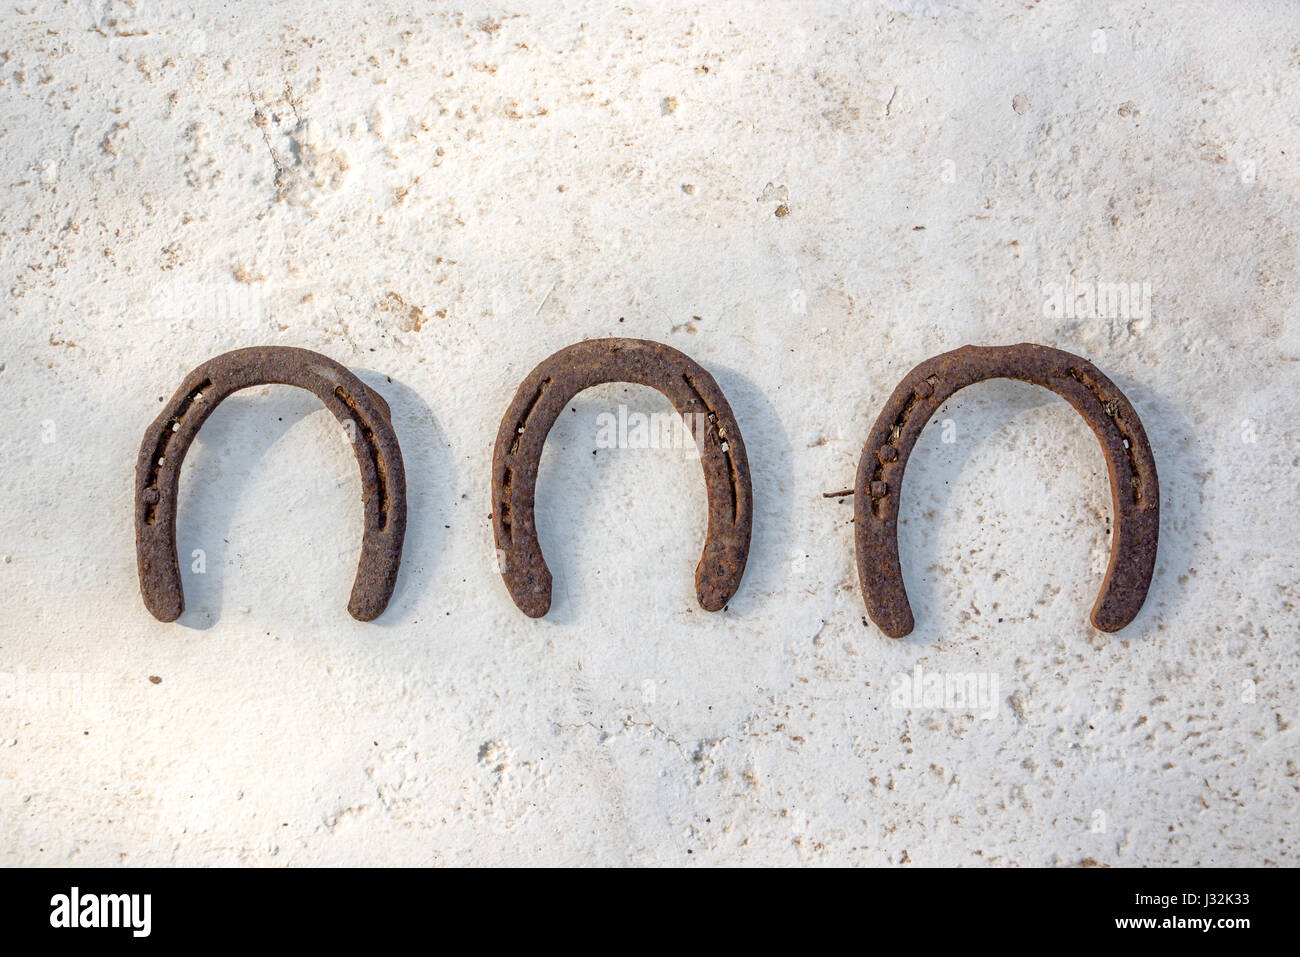 Three old rusty horseshoes hanging on a white wall, luck symbol Stock Photo